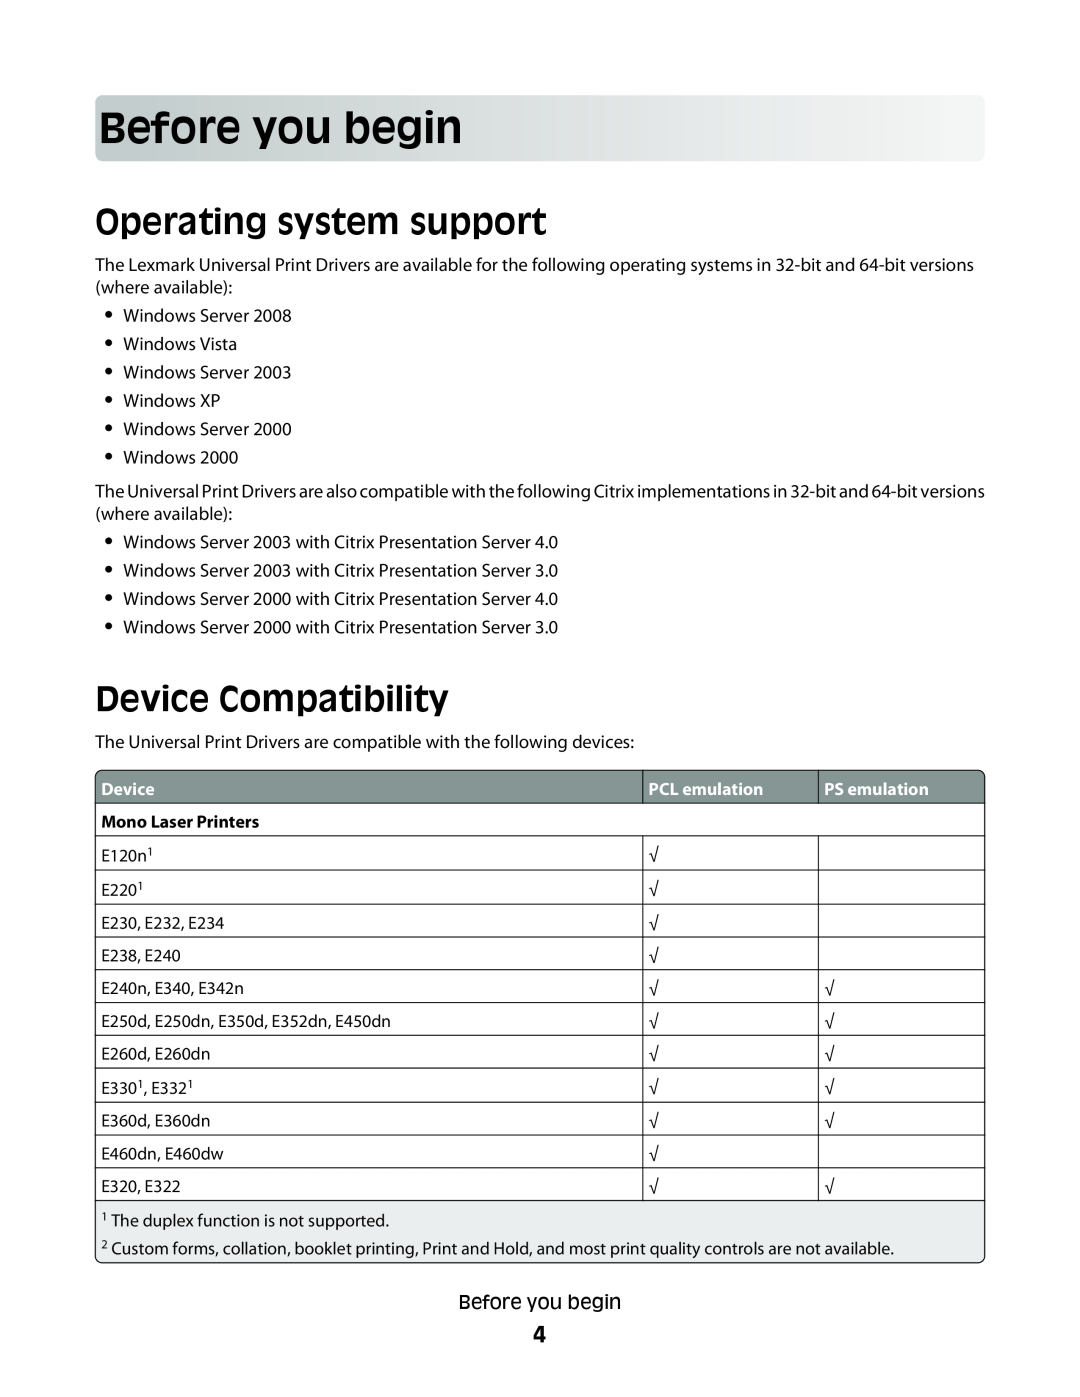 Lexmark Universal Driver manual Beforeyoubegin, Operating system support, Device Compatibility 